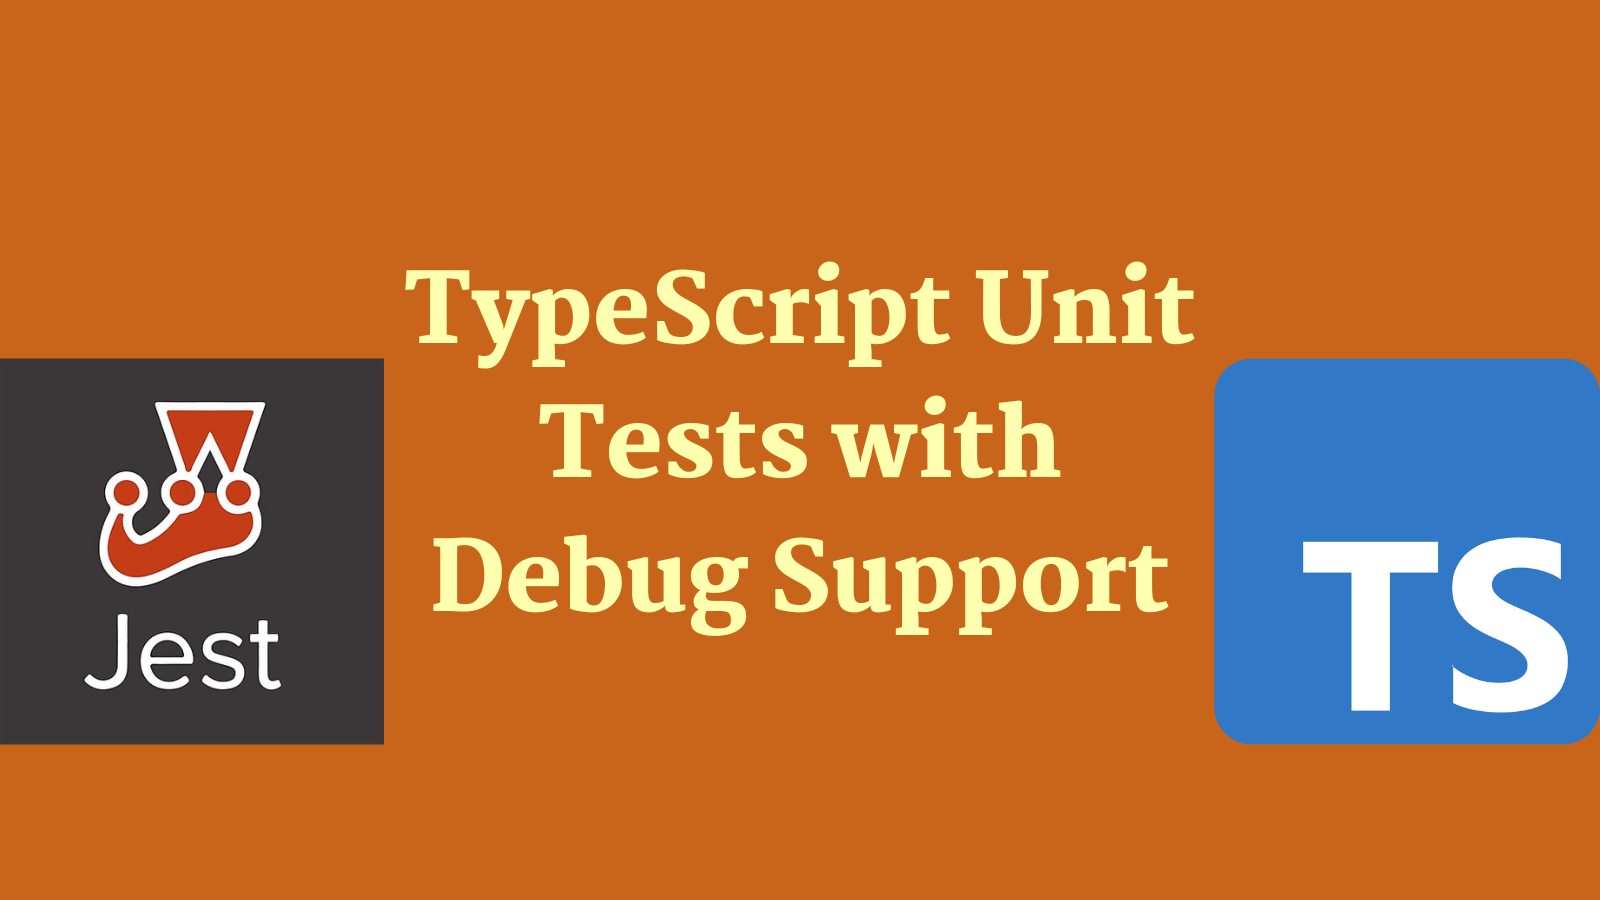 title image reading &quot;TypeScript Unit Tests with Debug Support&quot; with TypeScript and Jest logos